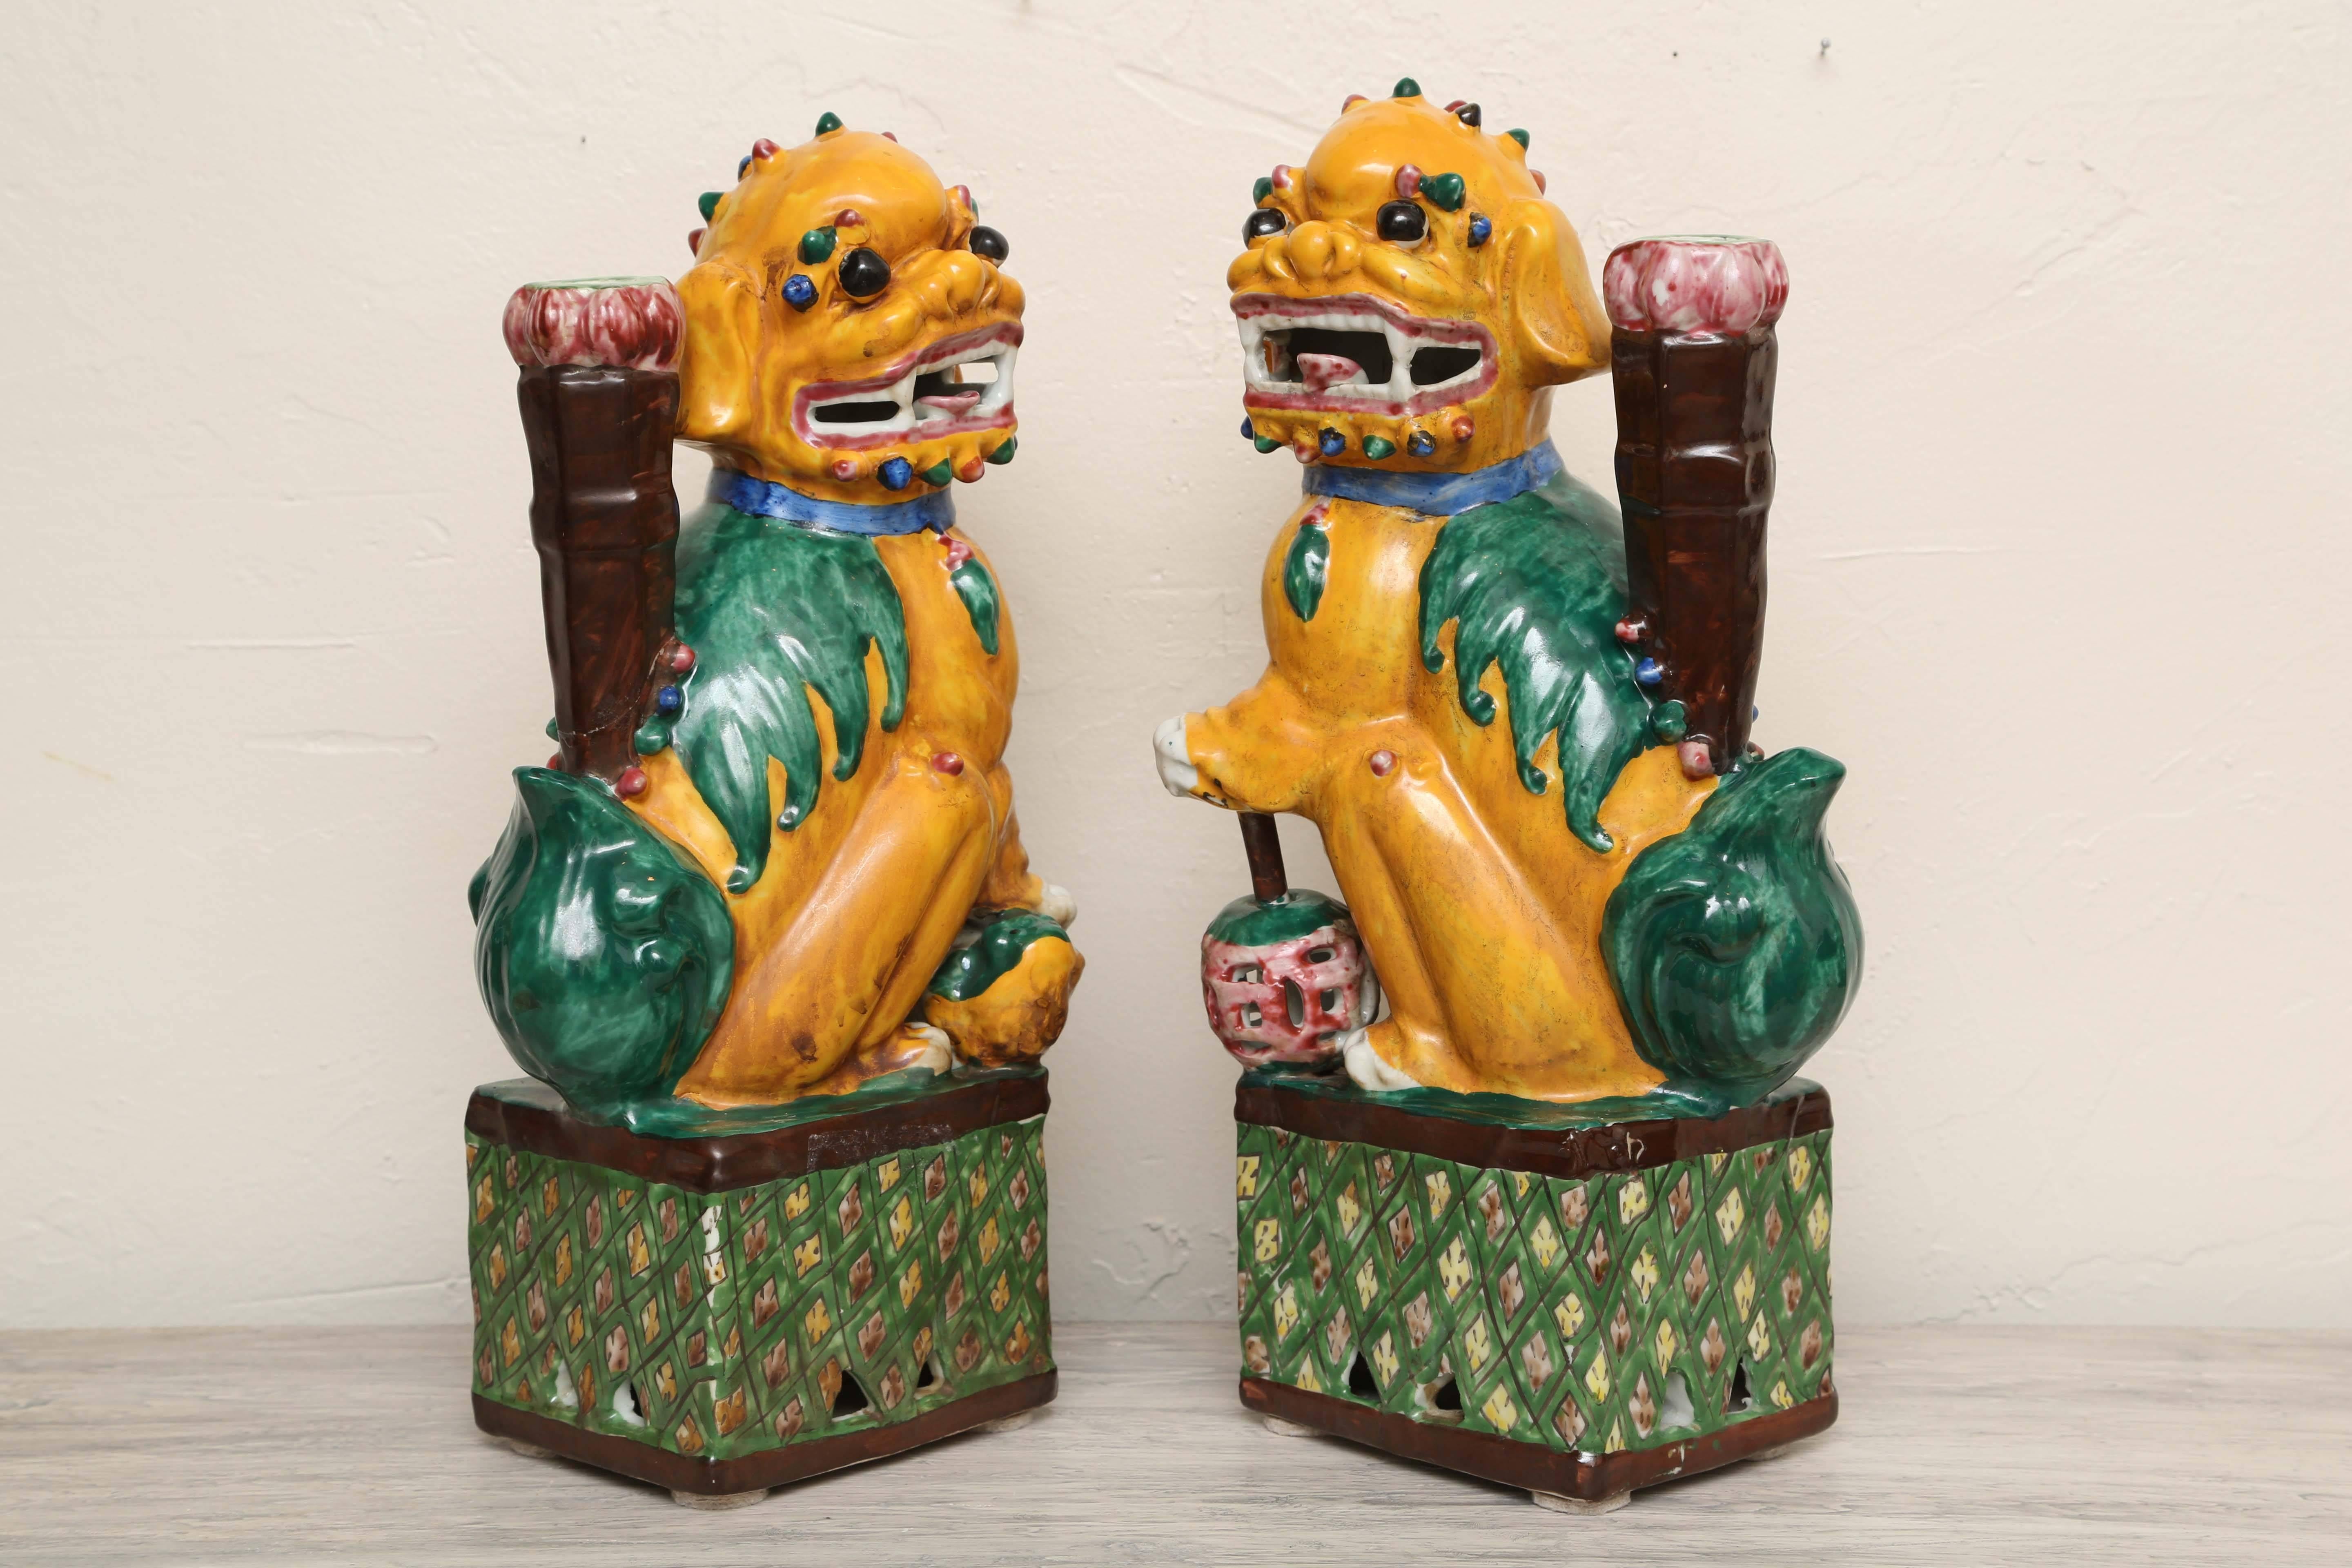 Exceptional and unique pair of late 19th century Foo Dogs. Done in beautiful, vibrant colors with great attention to detail.